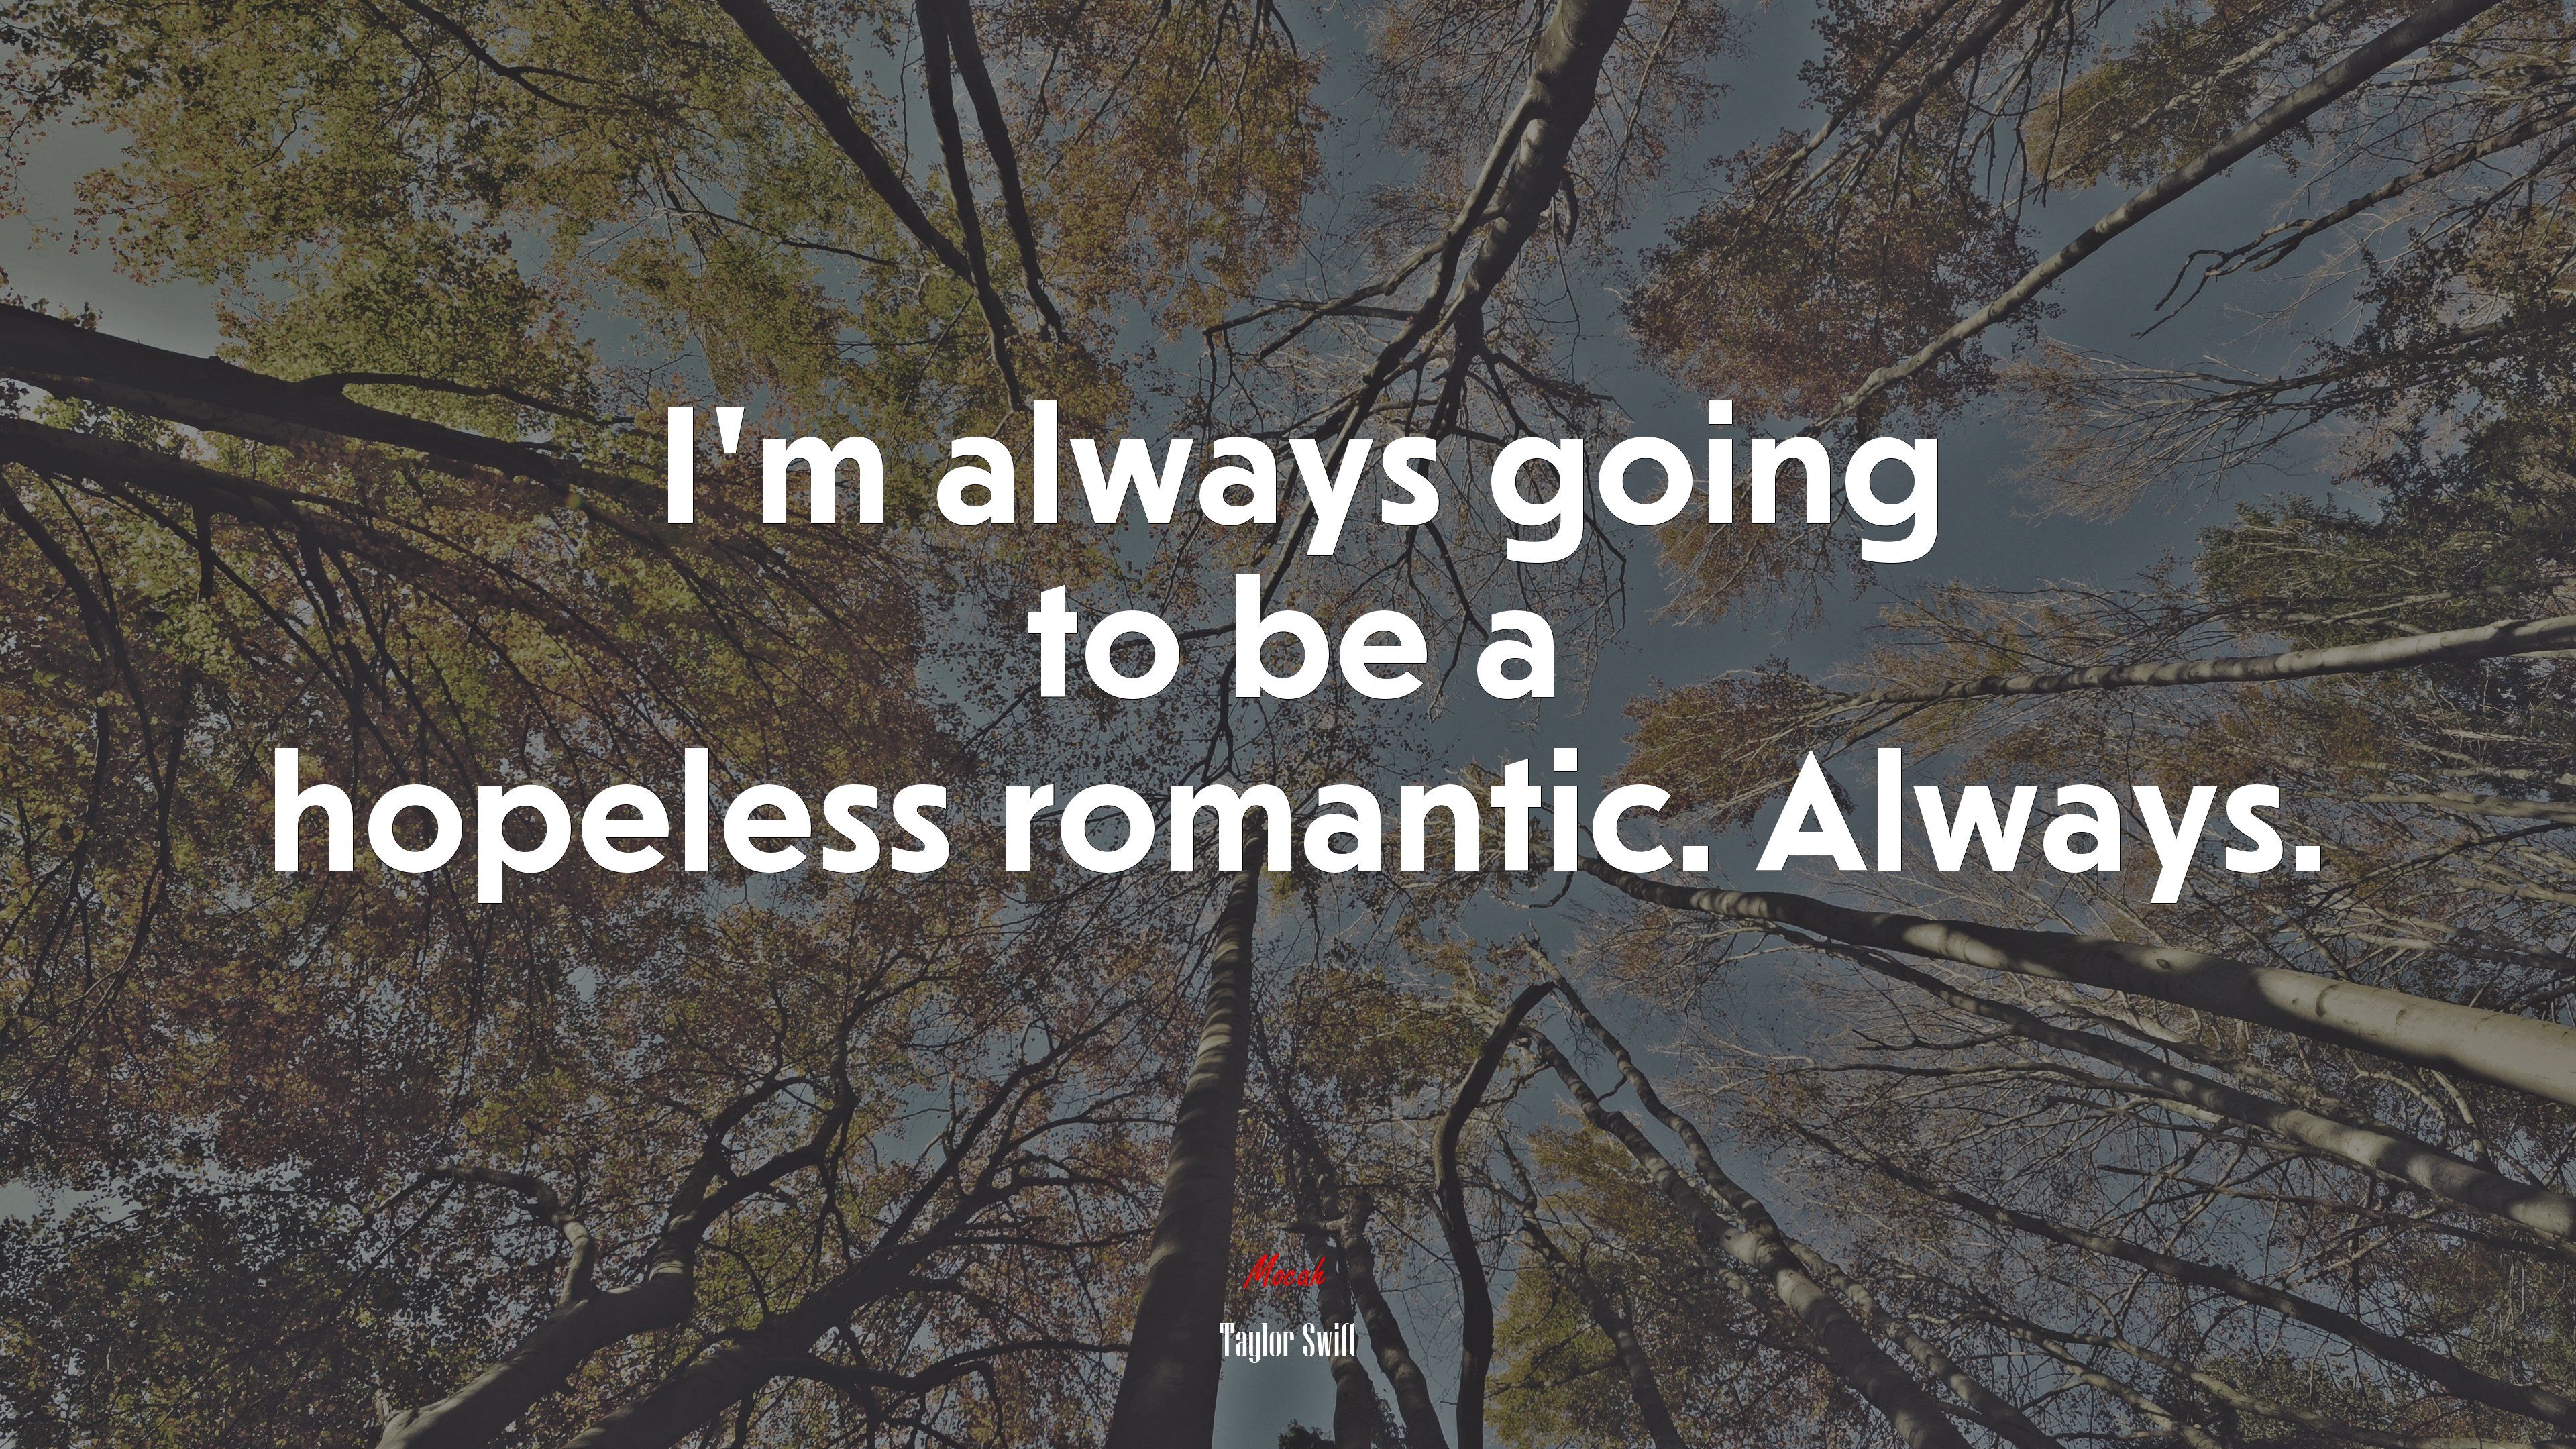 I'm always going to be a hopeless romantic. Always. Taylor Swift quote, 4k wallpaper